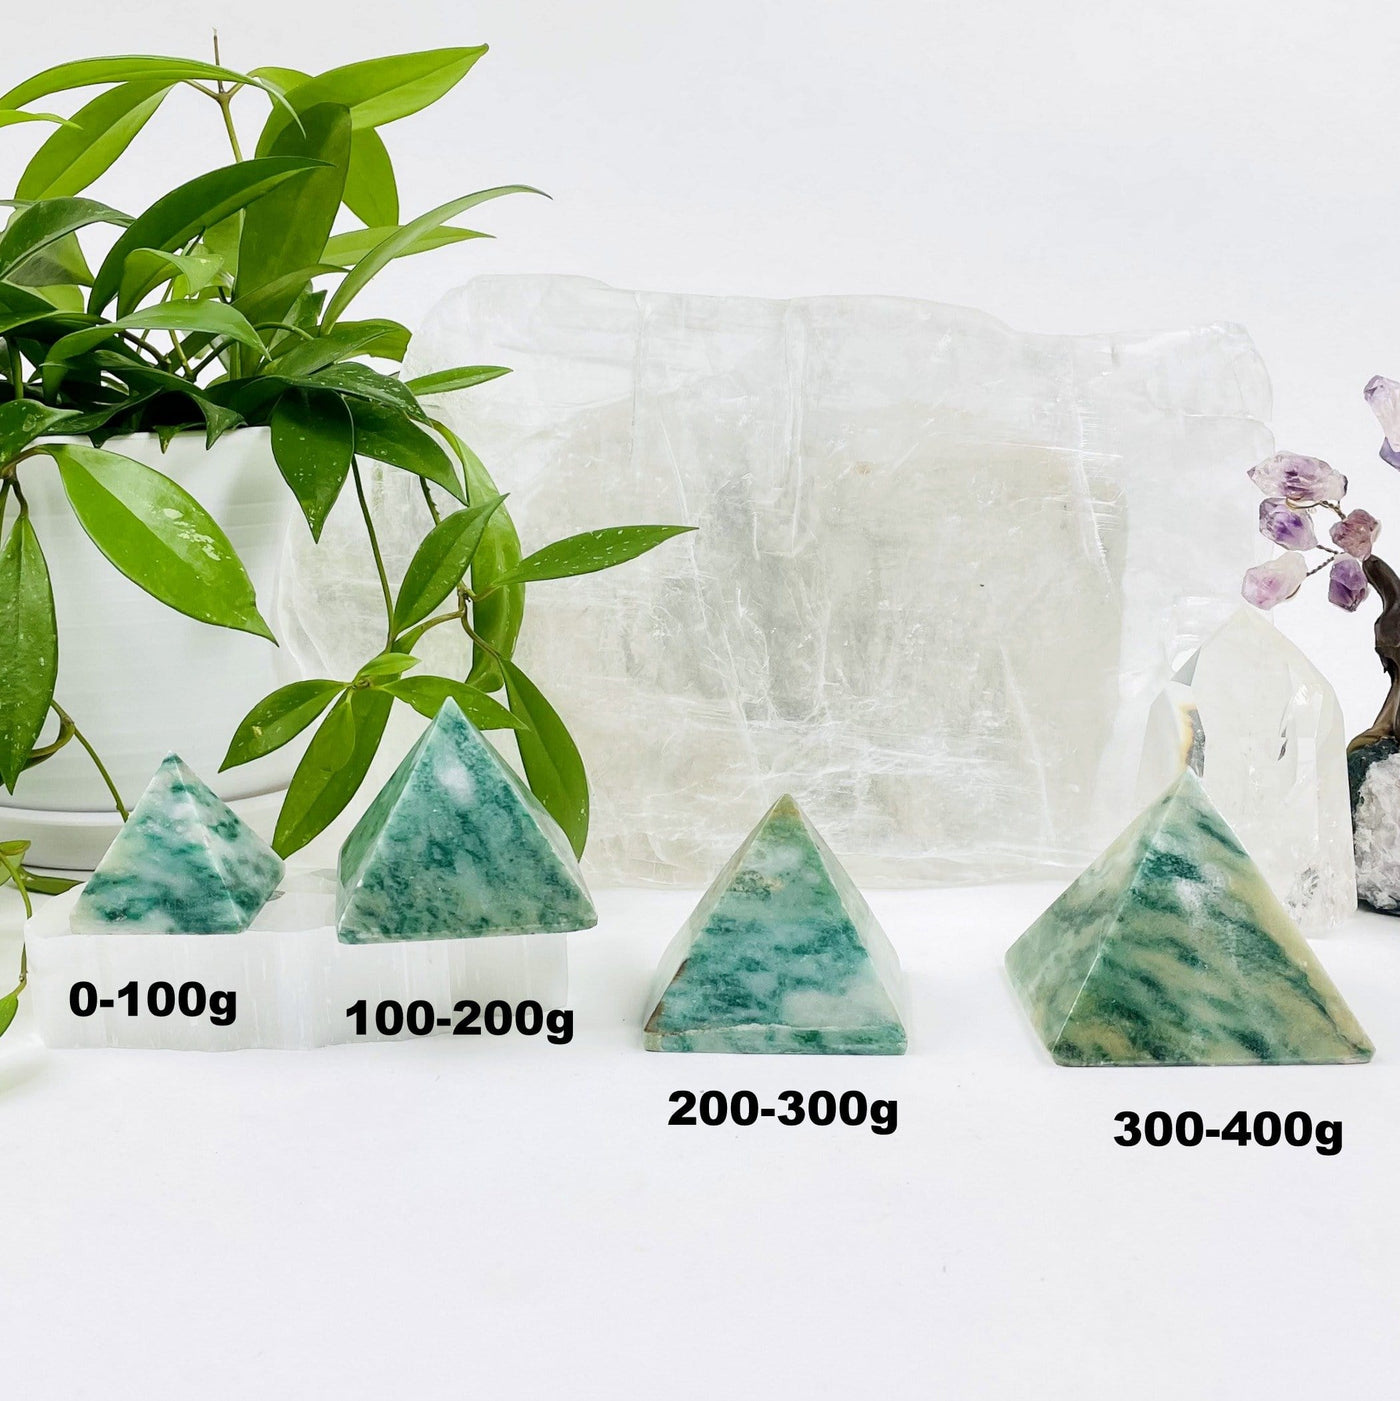 fuchsite pyramids available in 0-100g, 100-200g, 200-300g, and 300-400grams